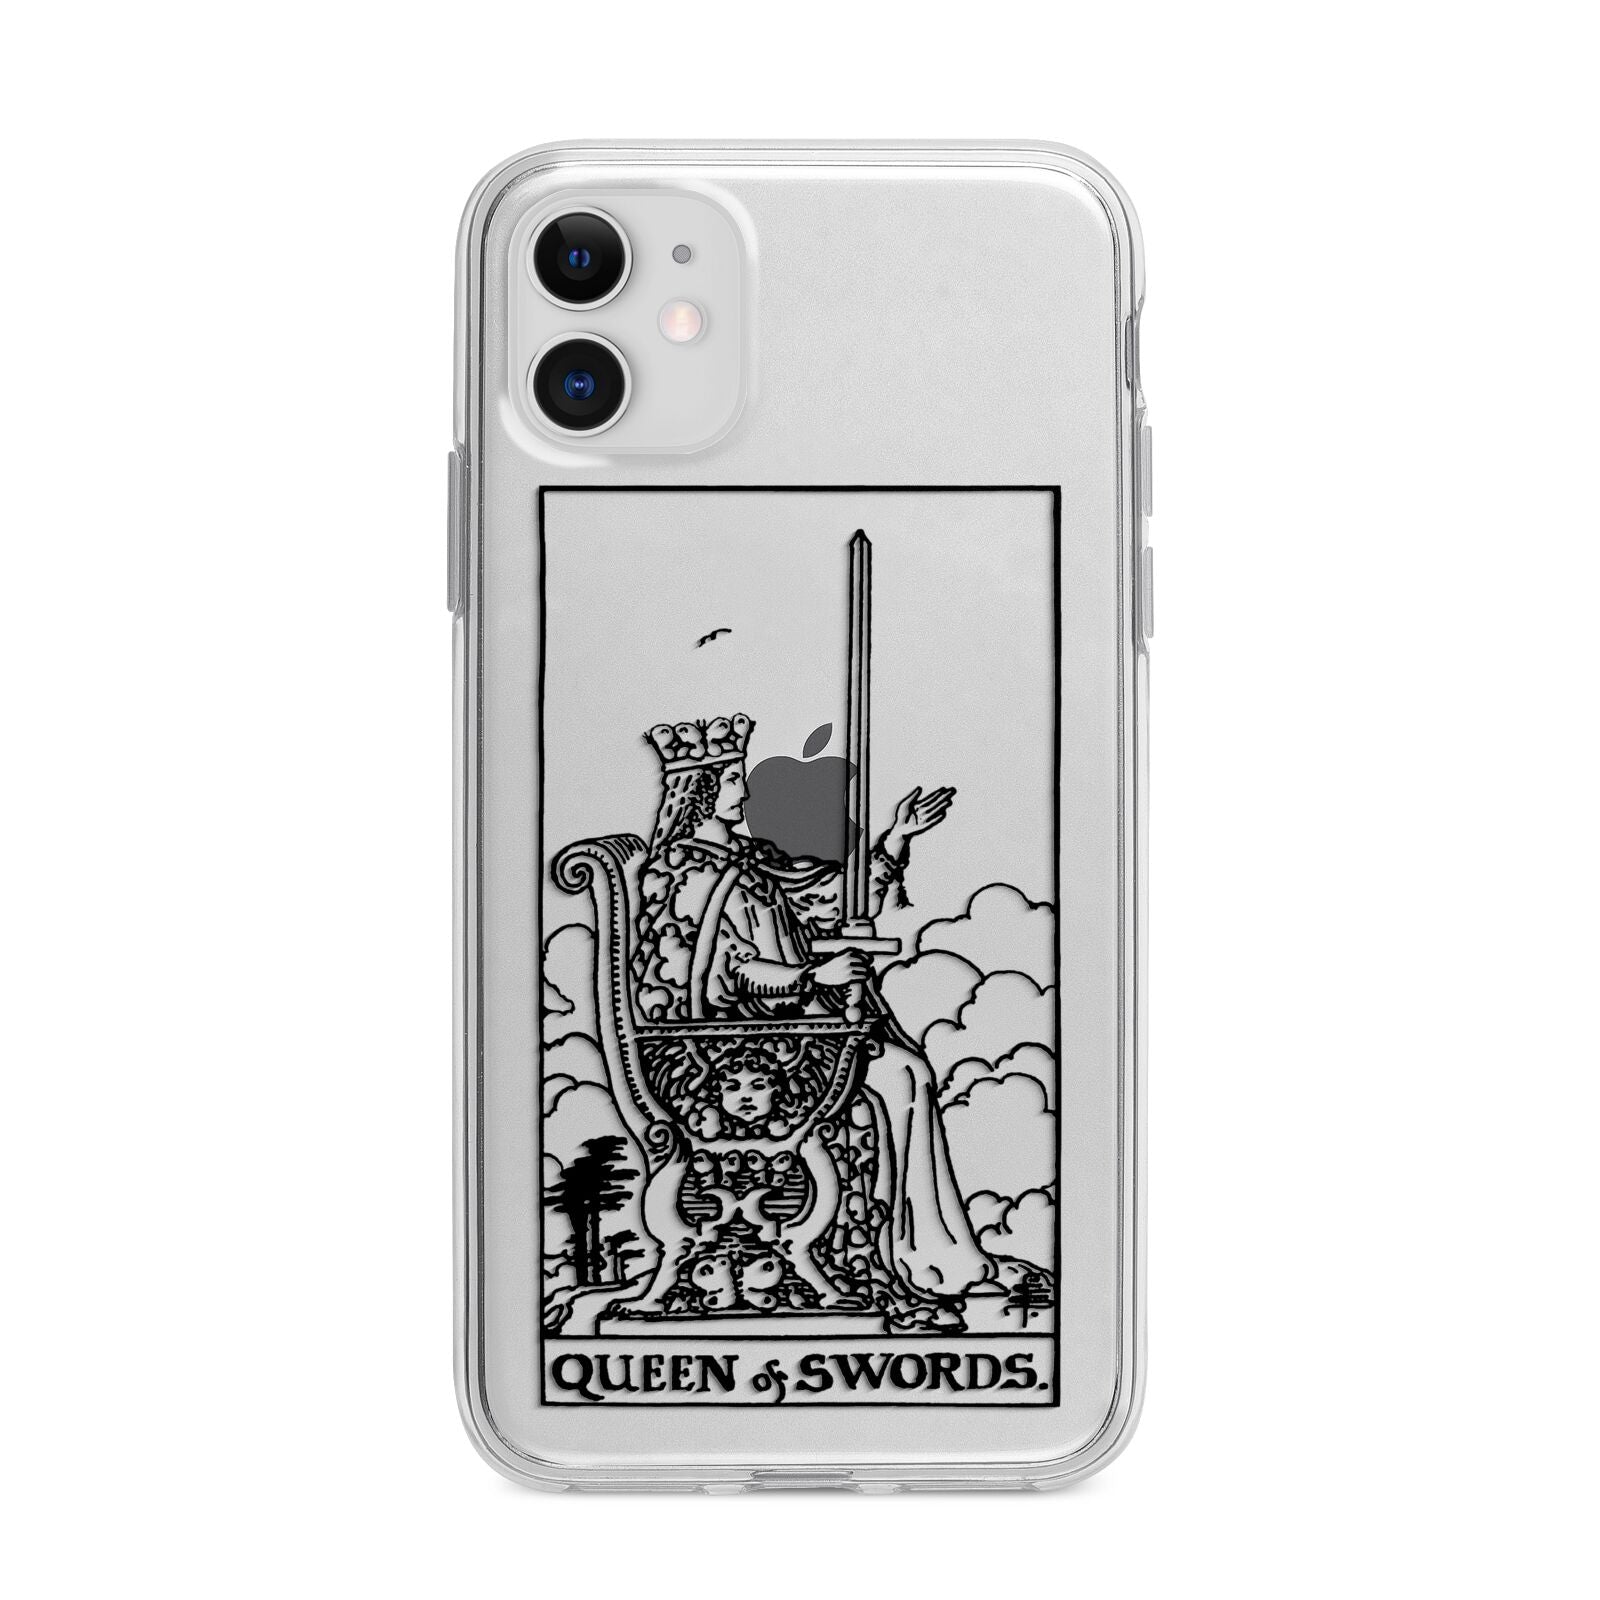 Queen of Swords Monochrome Apple iPhone 11 in White with Bumper Case